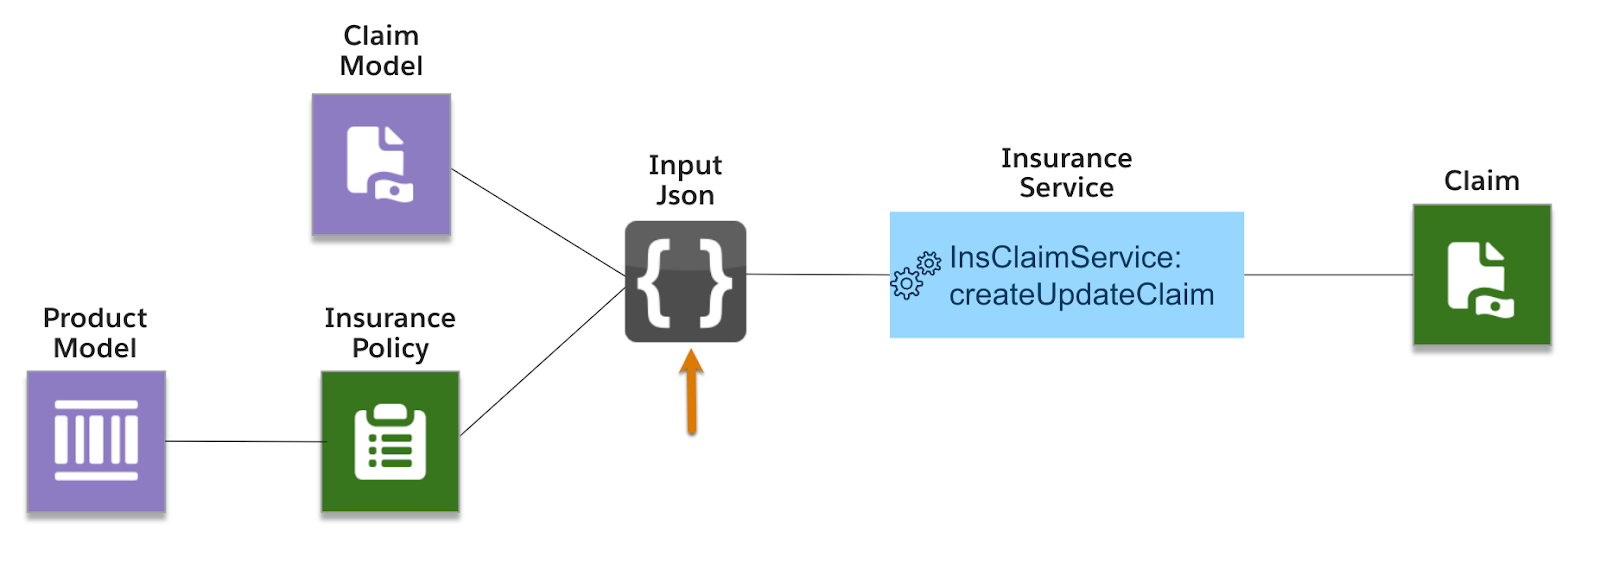 The diagram shows how input Json combines Claim Model and Insurance Policy information.